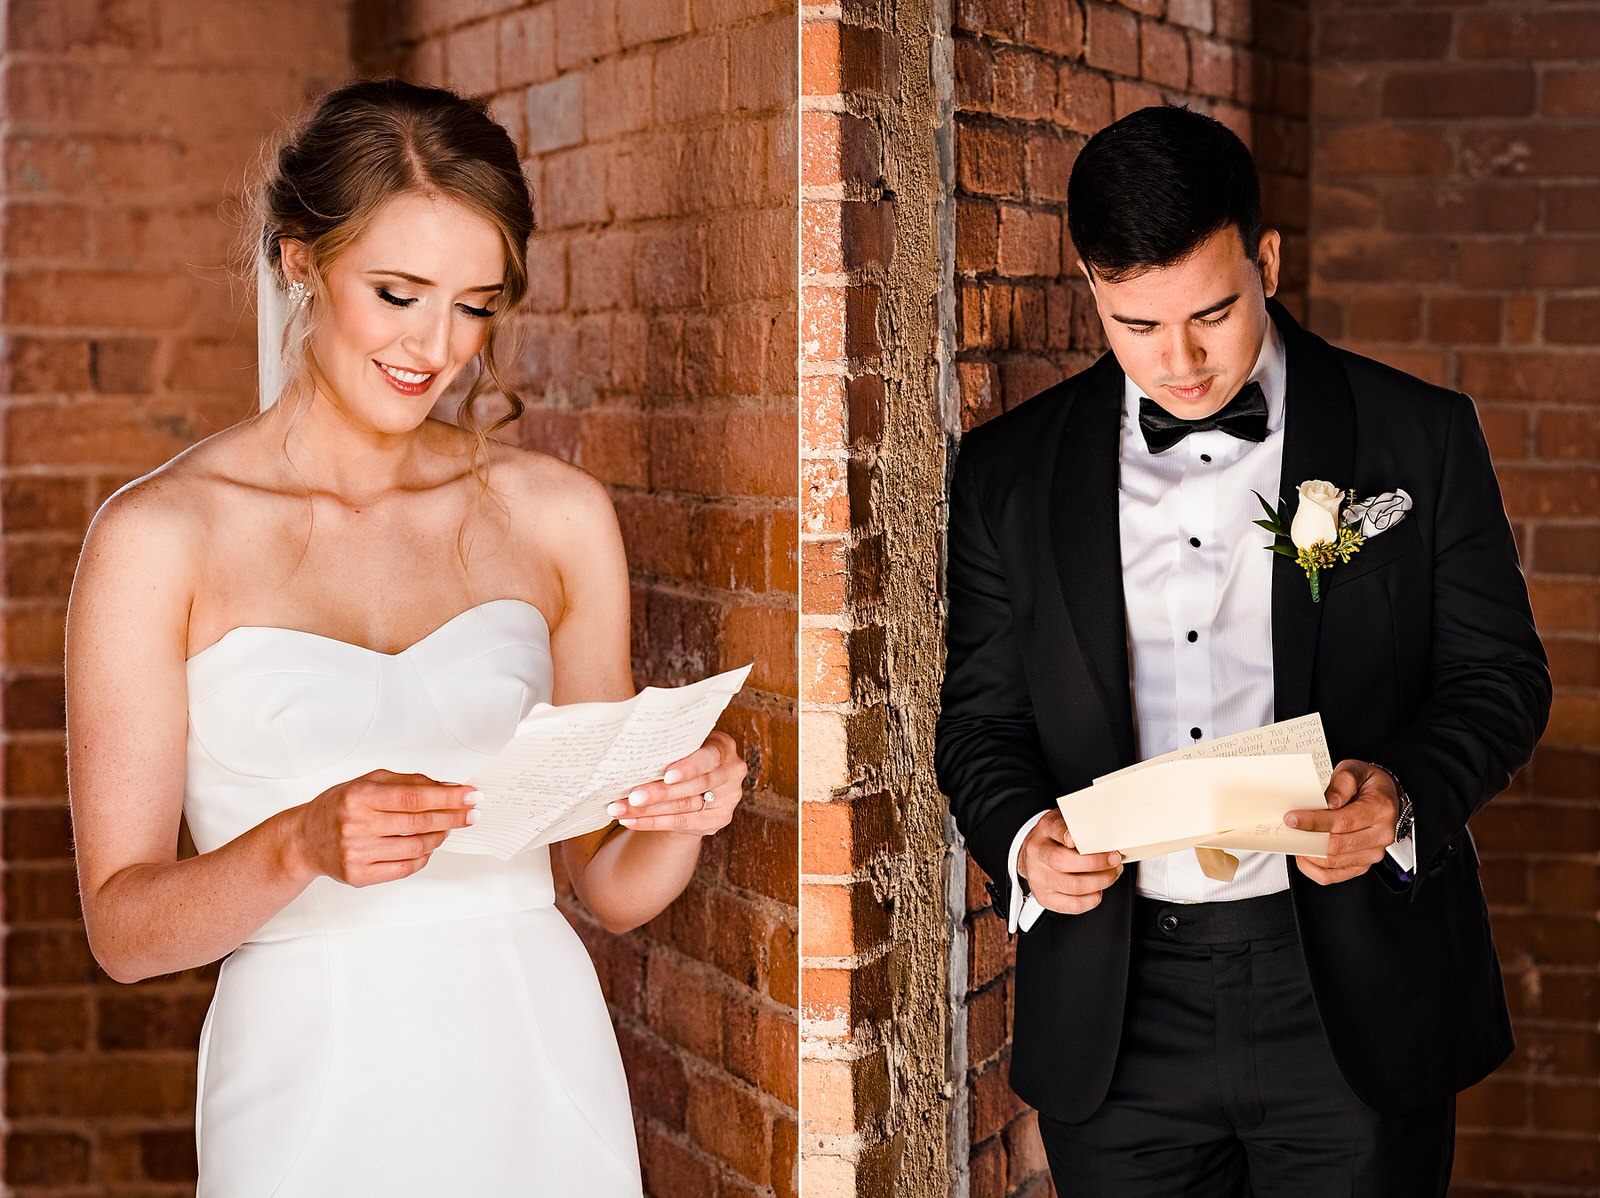 This couple exchanged letters without seeing one another before the ceremony